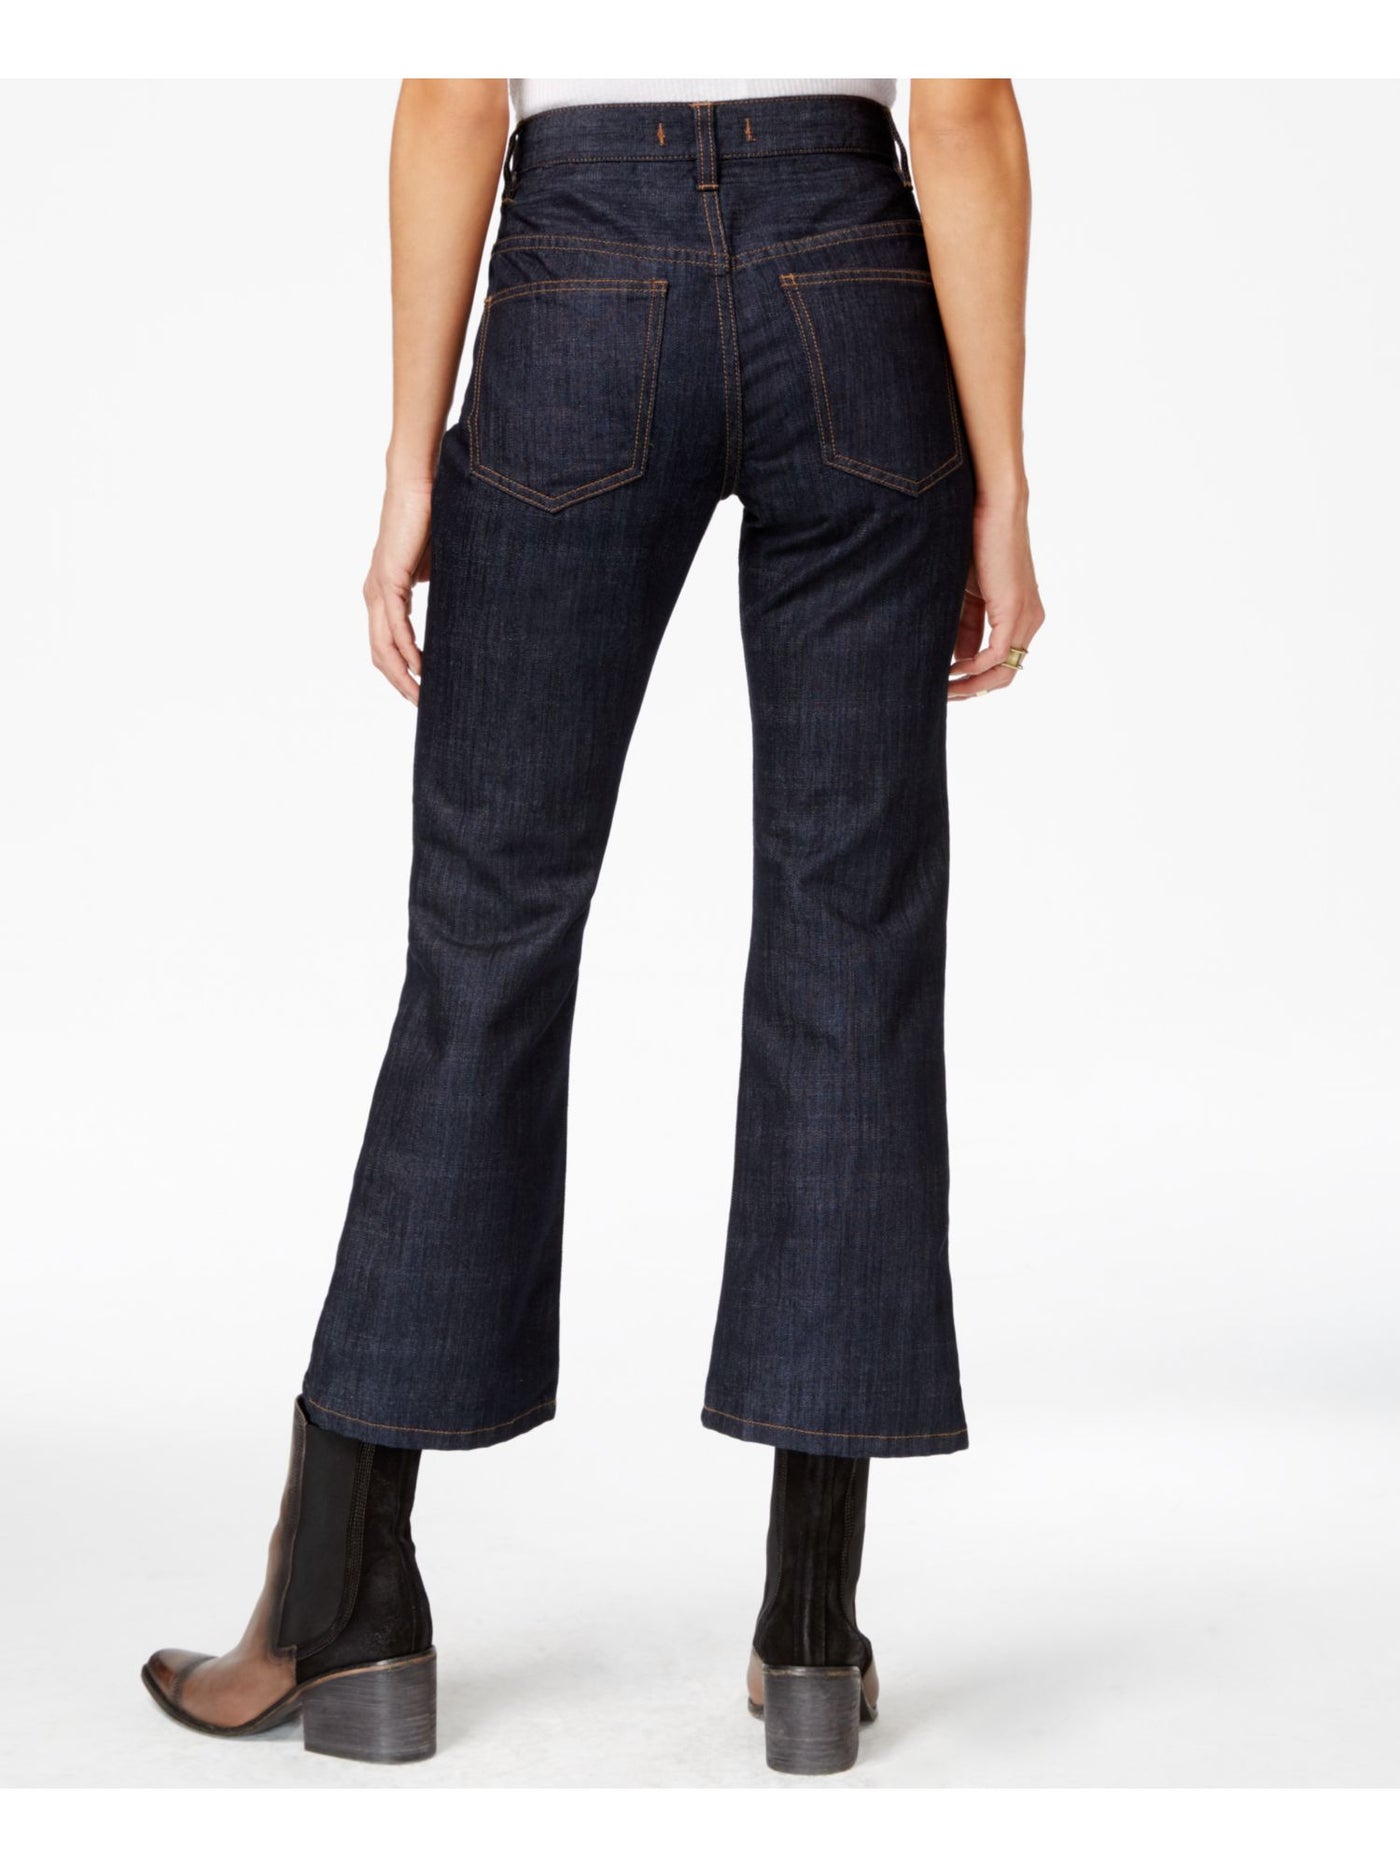 FREE PEOPLE Womens Navy Cropped Jeans 24 Waist